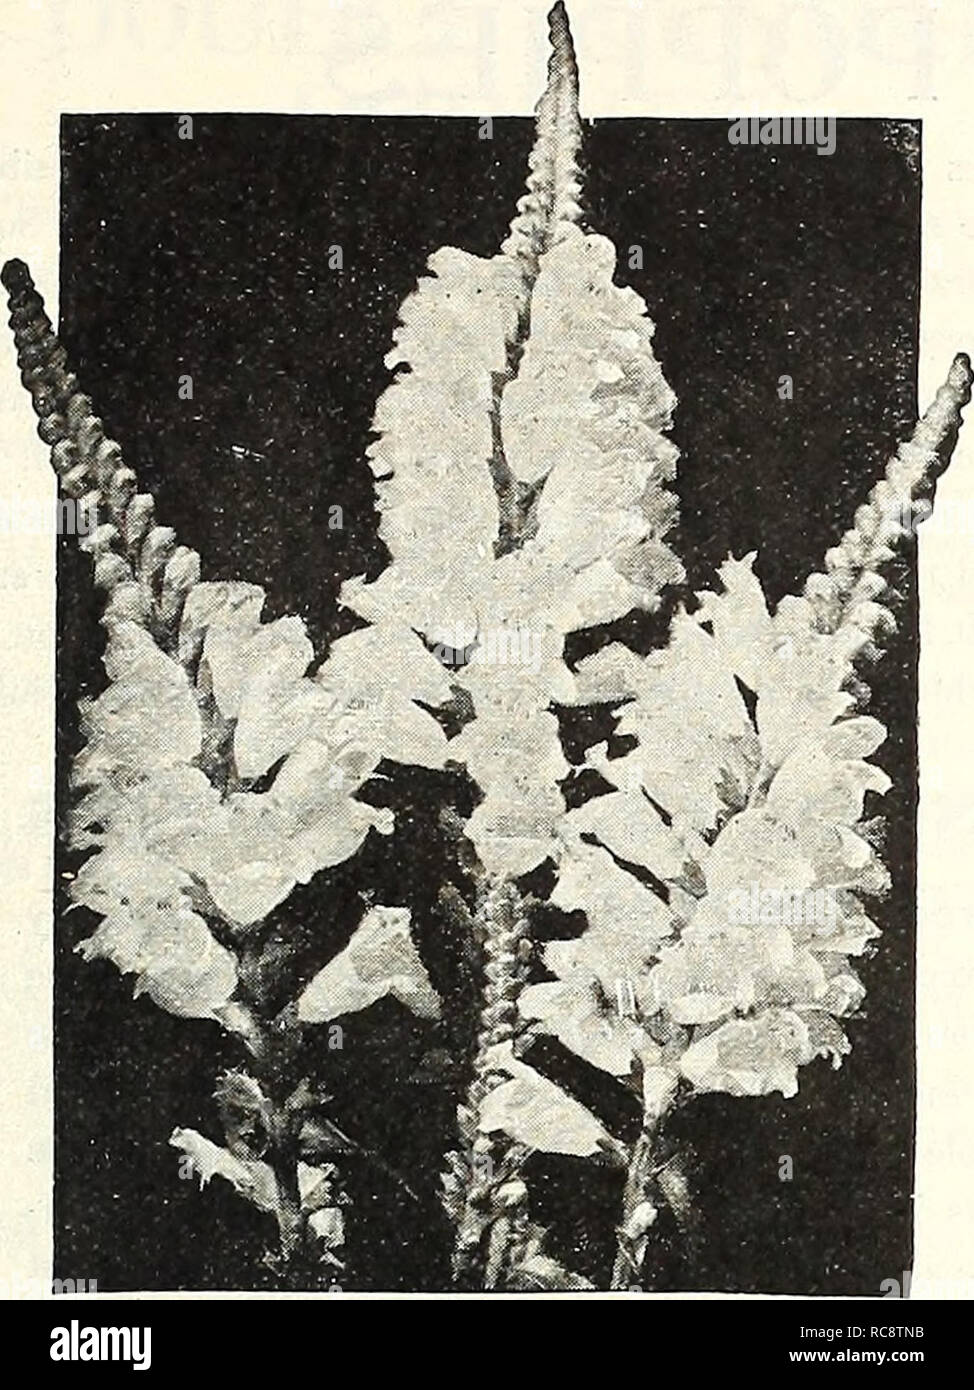 . Dreer's garden book 1922. Seeds Catalogs; Nursery stock Catalogs; Gardening Equipment and supplies Catalogs; Flowers Seeds Catalogs; Vegetables Seeds Catalogs; Fruit Seeds Catalogs. JflJl^MmiaaiiiitWiiipidrMitiiikl^^ 103. Physostegia PHYSOSTEGIA (False Dragon Head) PER PKT, 3651 Virglnica. One of the prettiest hardy perennials, and gaining in popularity asit becomes better known. It forms dense bushes, 3 to 4 feet high, bearing freely during the summer months spikes of delicate pink tu- bular flowers not unlike a gigantic heather 10 3652 — Alba. A pretty white- flowered form of the above 10  Stock Photo